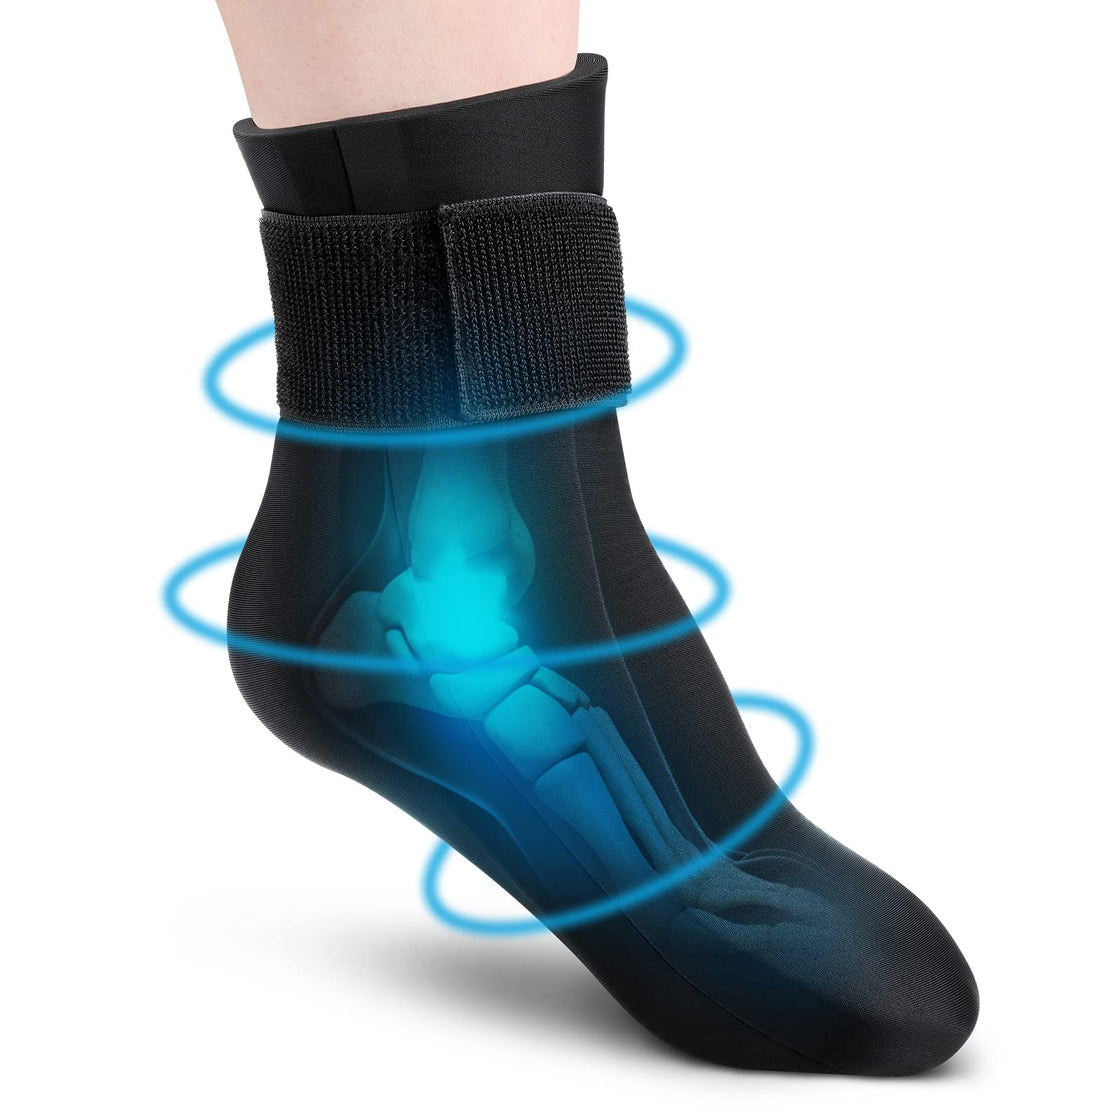 Tolaccea Reusable Gel Cold Therapy Sock for Hot & Cold Therapy